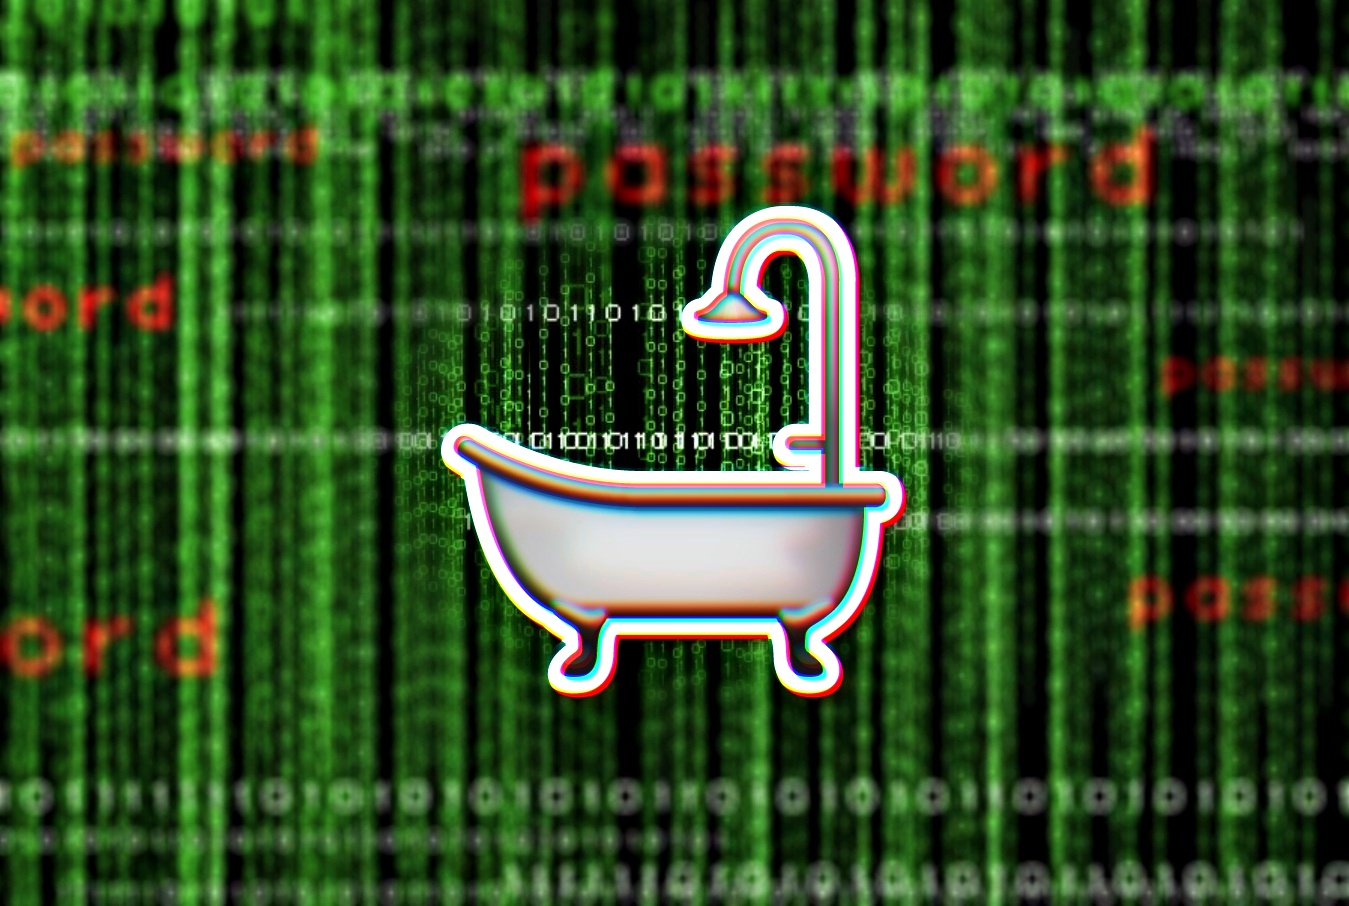 Thousands of Internet connected Hot Tubs vulnerable to hacking